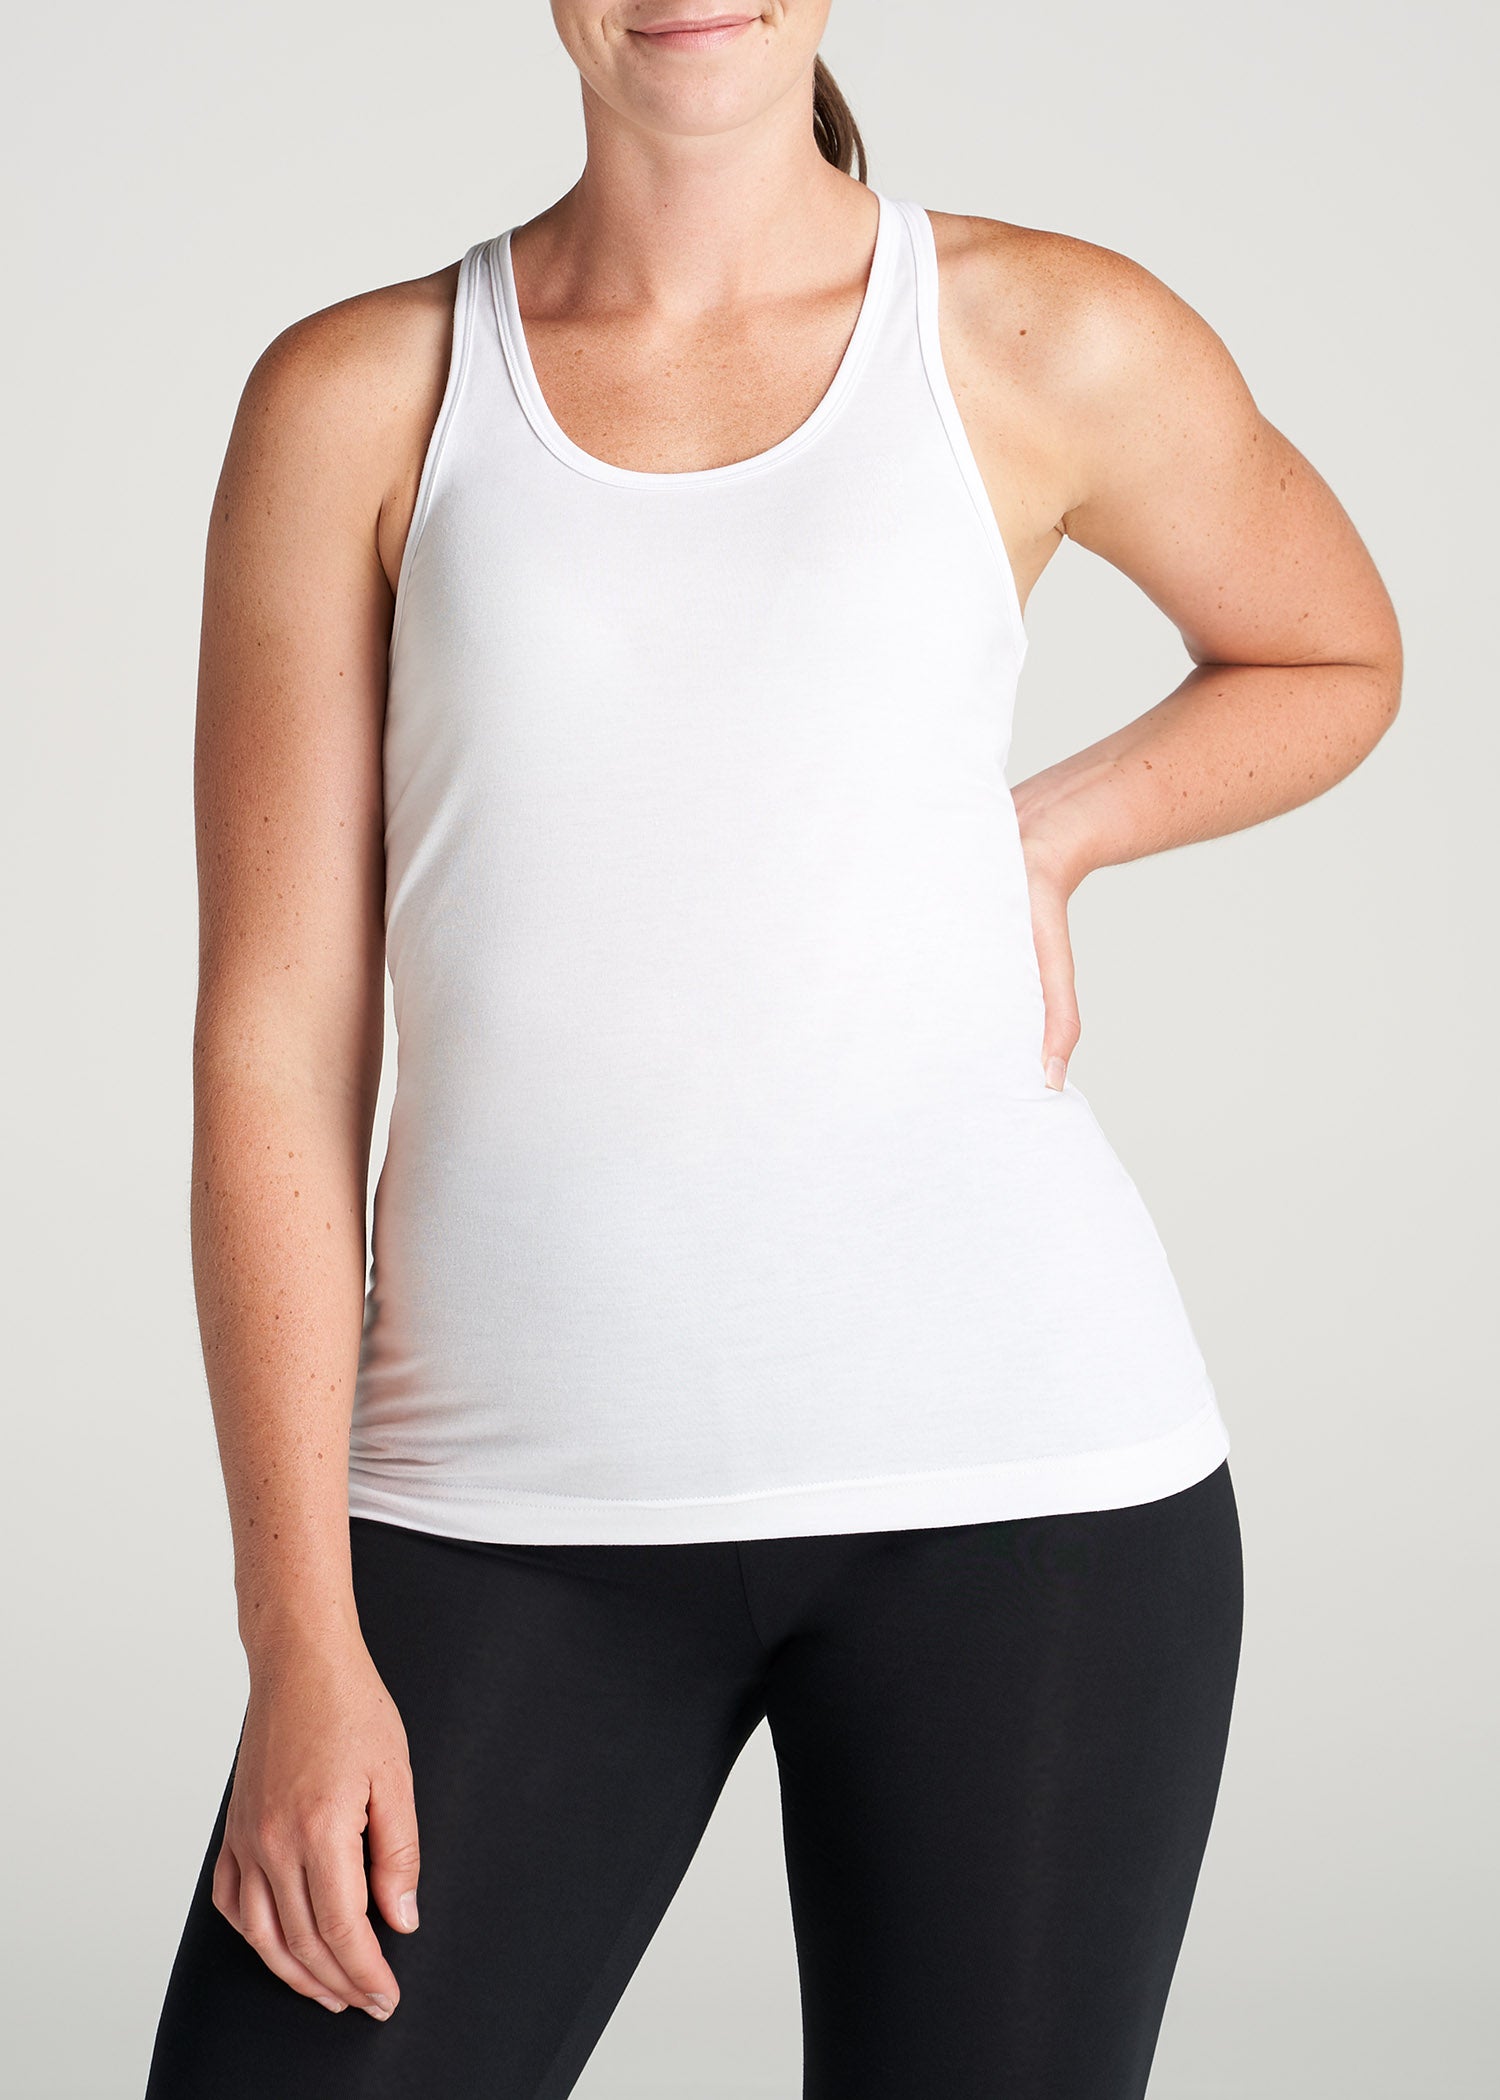 American Tall Racerback Tank Top in White - Extra-Long Women's Tanks